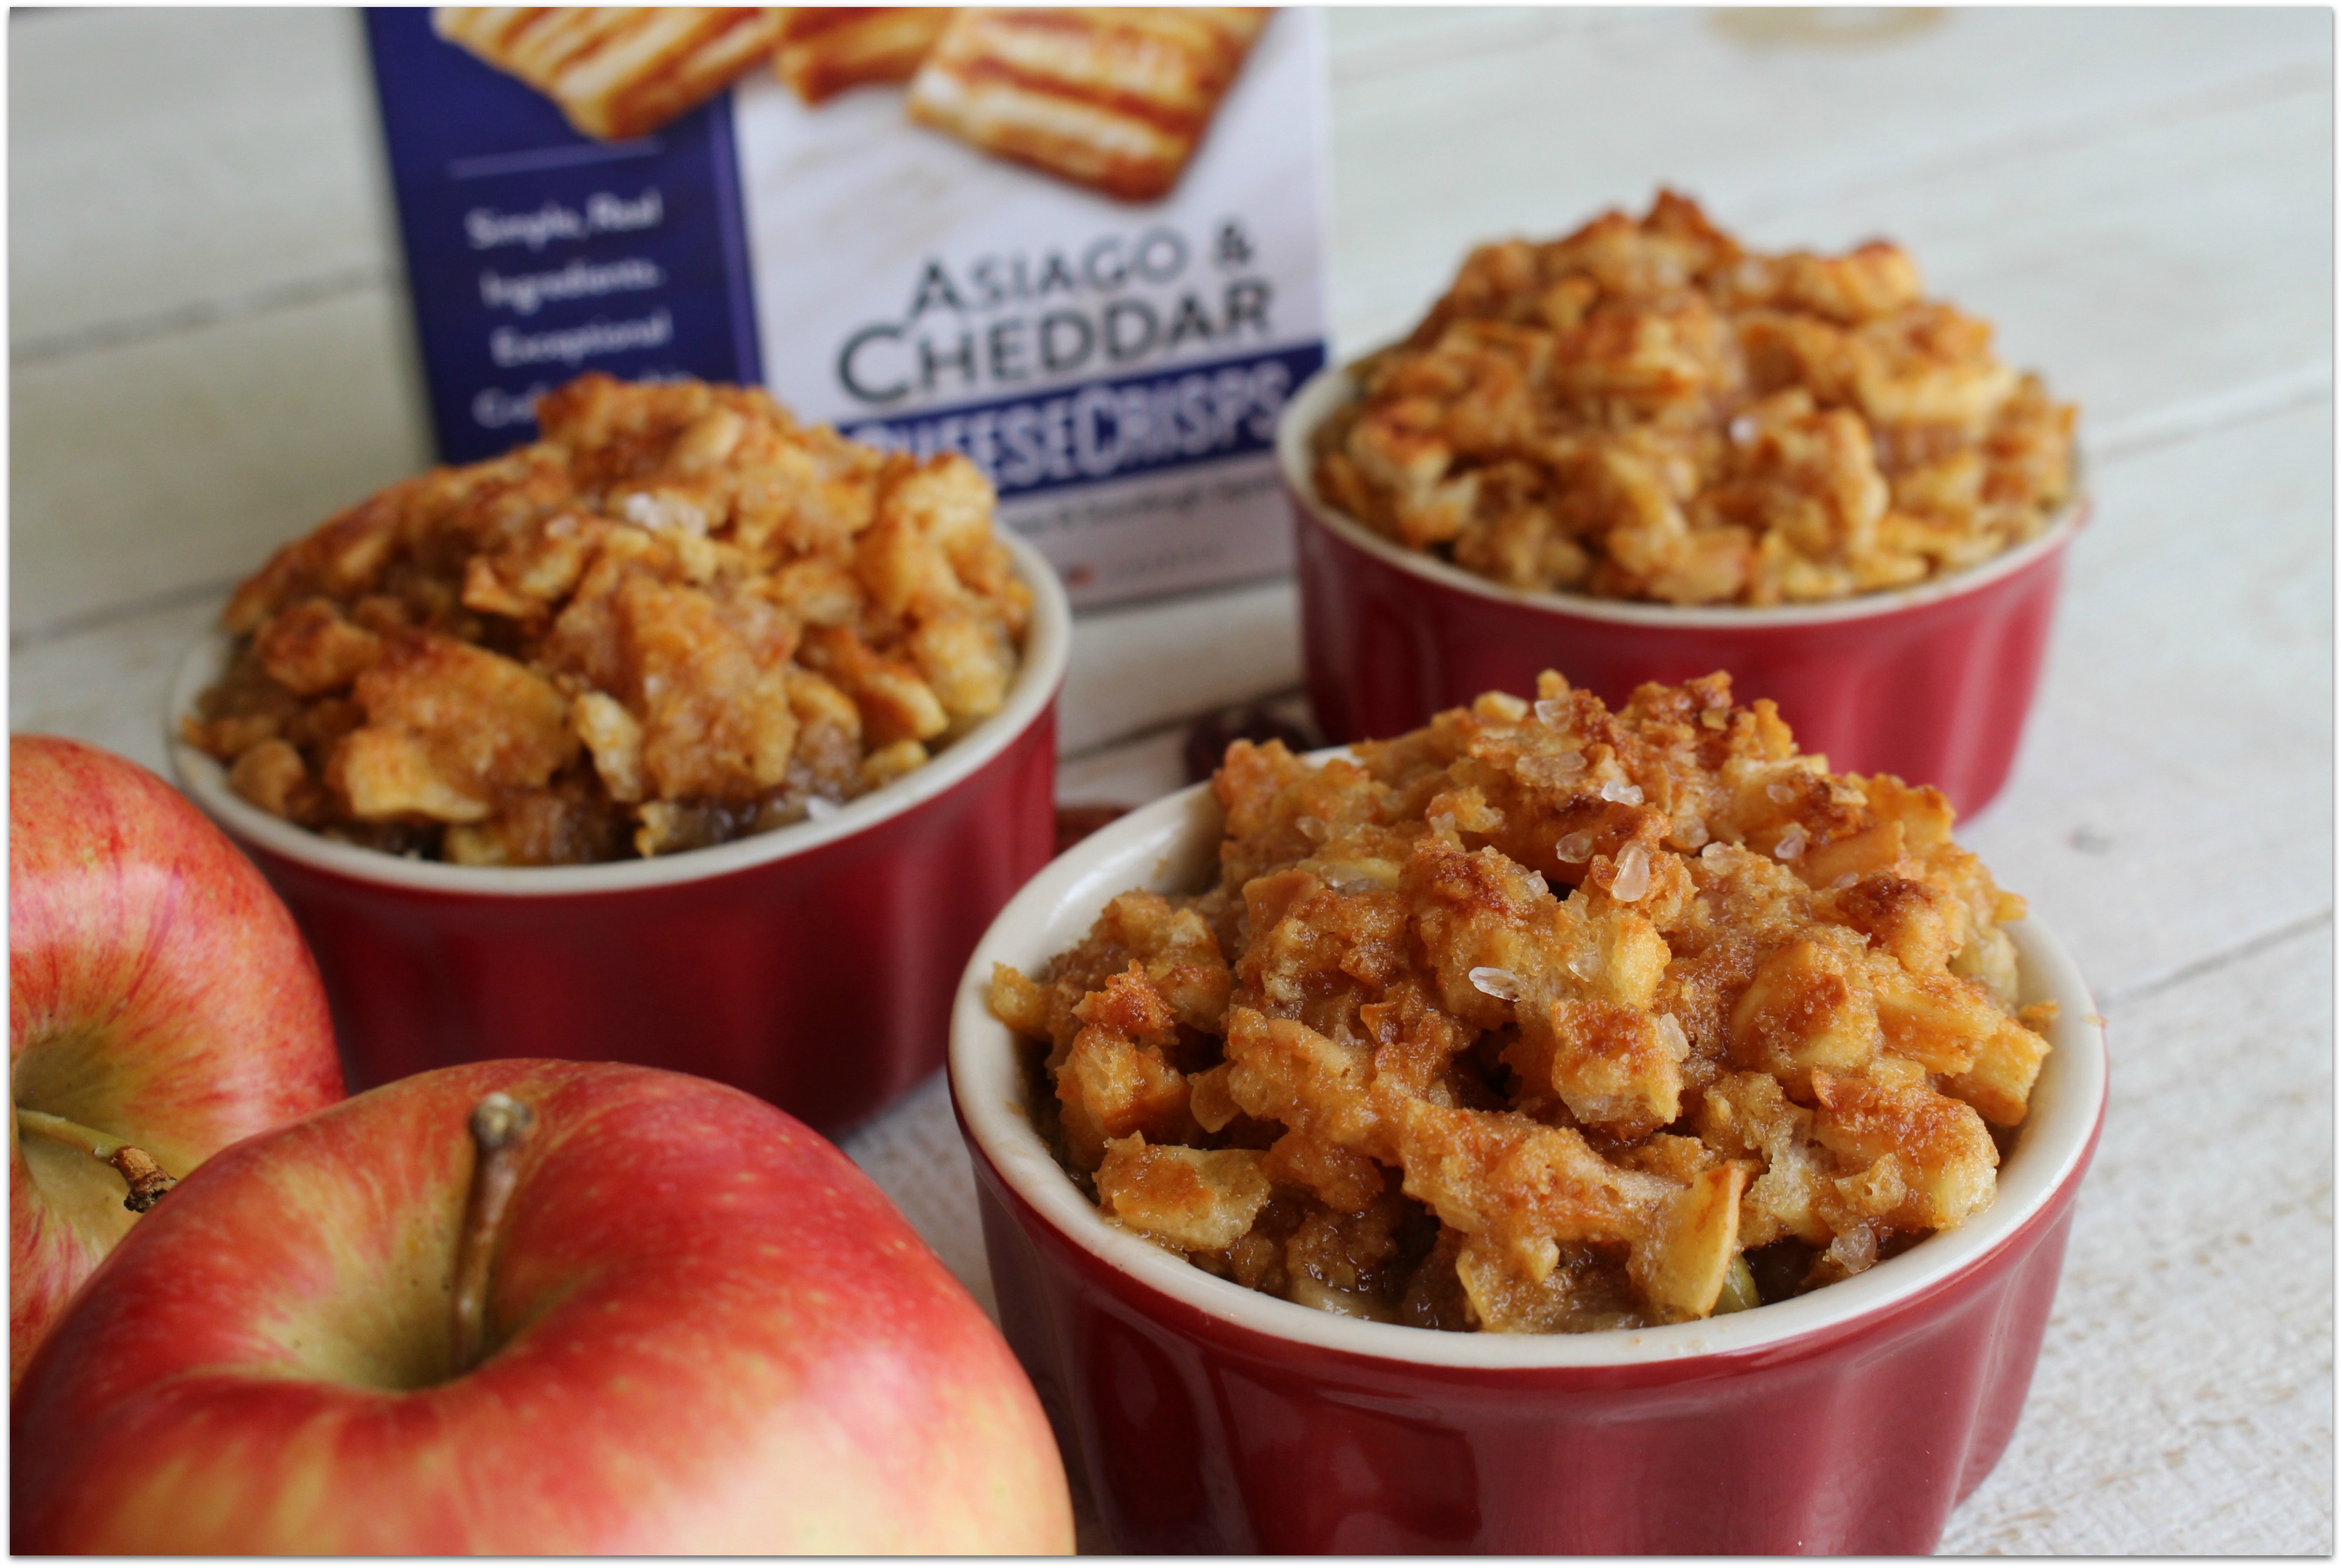 You are going to love this Crunchy Apple Crisp! When you're eating cooked apples, you have to have some crunch to go with the softness of the fruit, right?